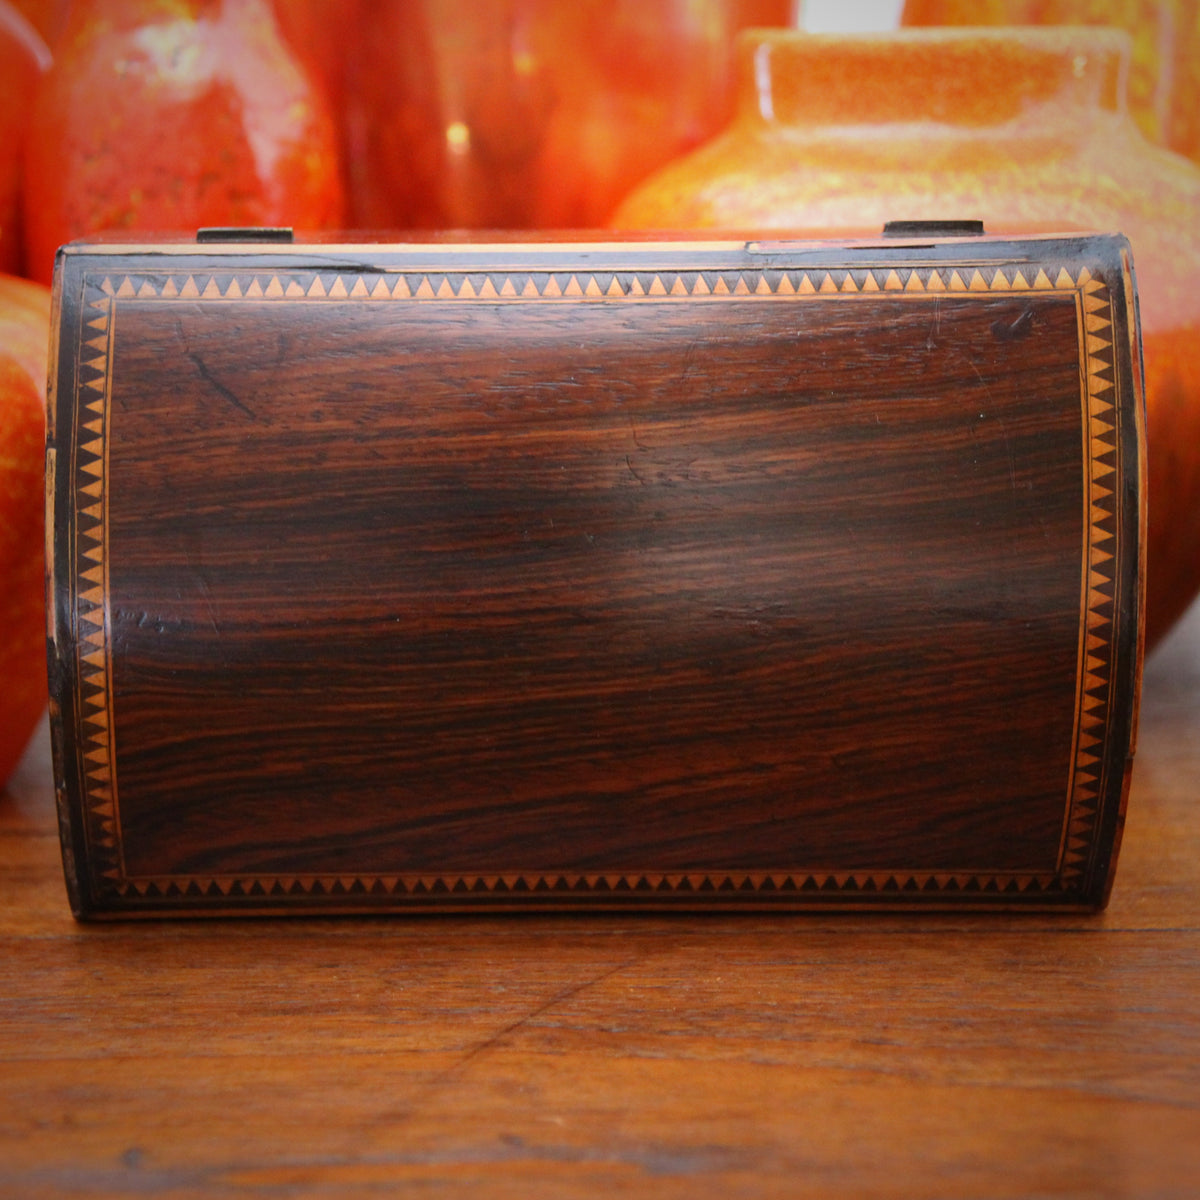 Rosewood Domed Box